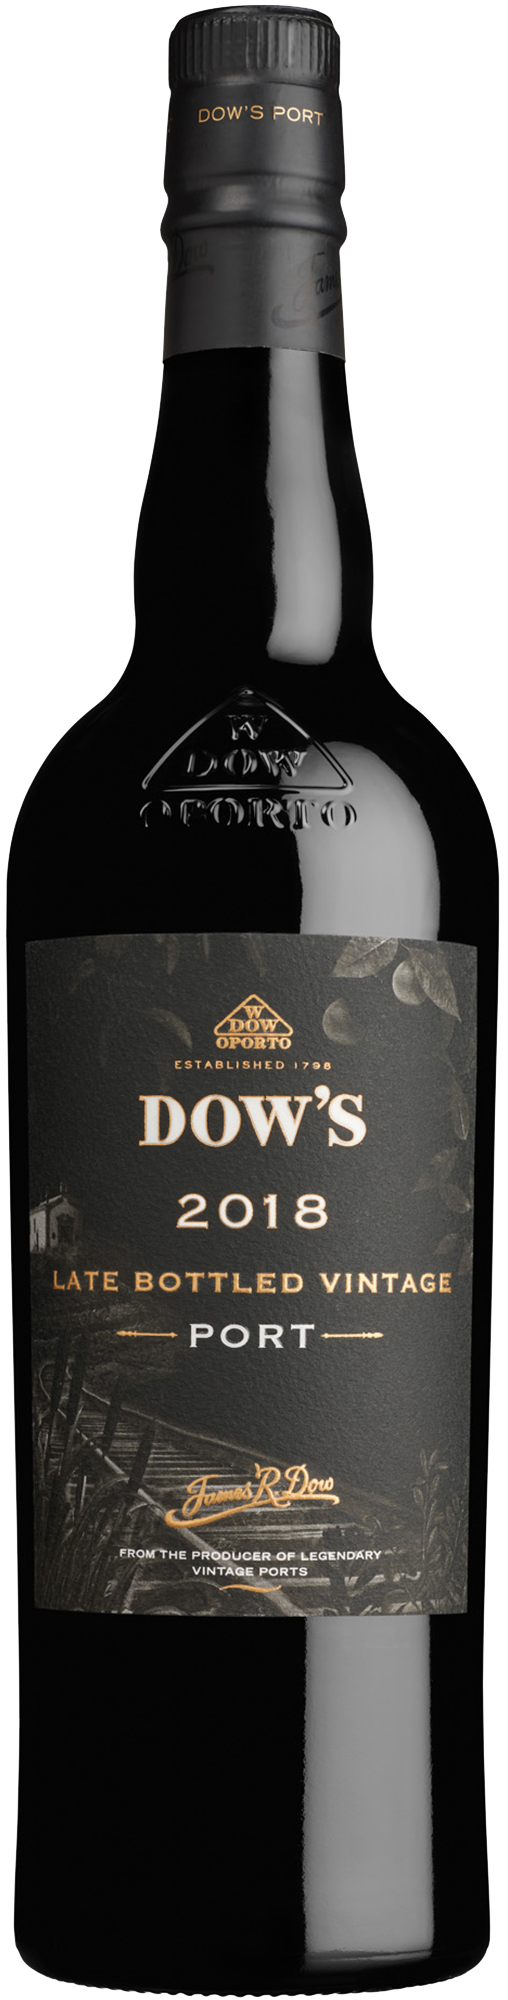 Product Image for DOW'S LATE BOTTLED VINTAGE PORT 2018